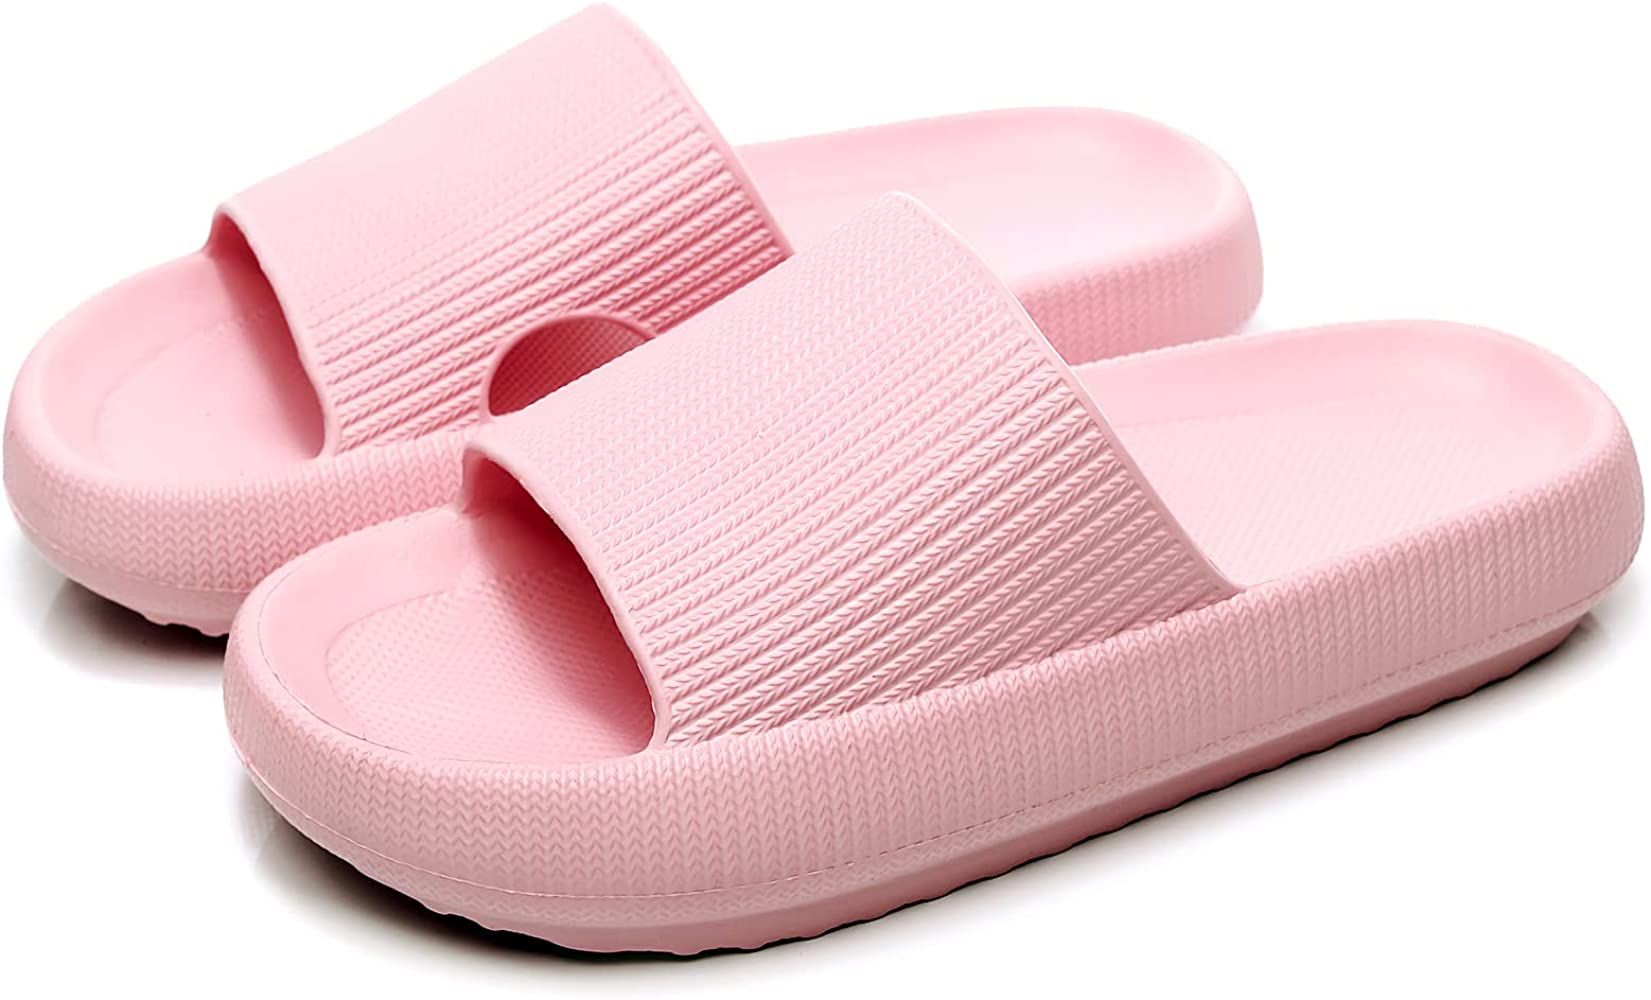 Cloud Slippers for Women and Men, Rosyclo Massage Shower Bathroom Non-Slip Quick Drying Open Toe ... | Amazon (US)